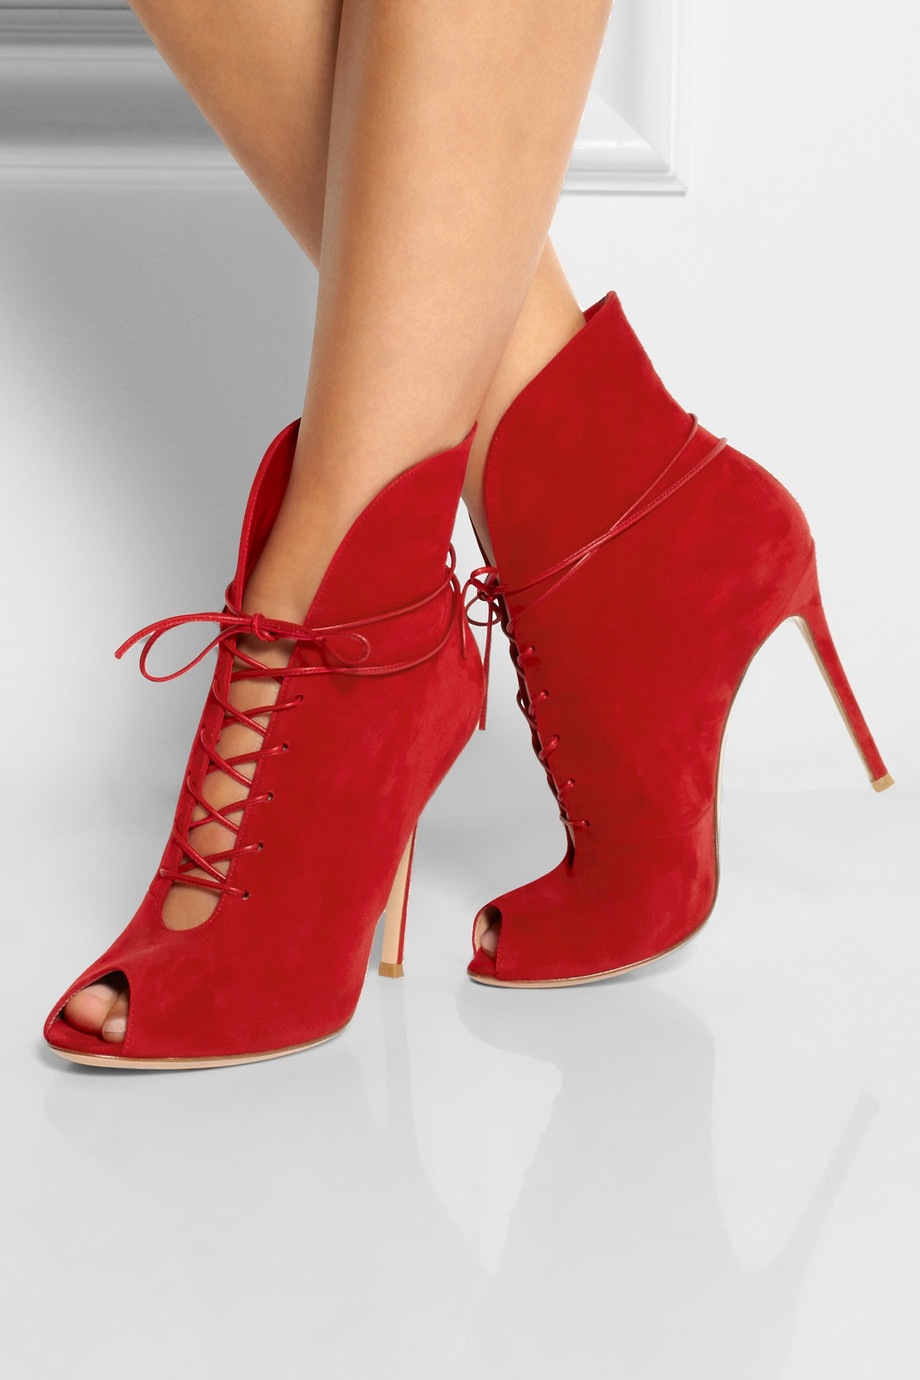 Gianvito Rossi Laceup Suede Ankle Boots in Red - Lyst